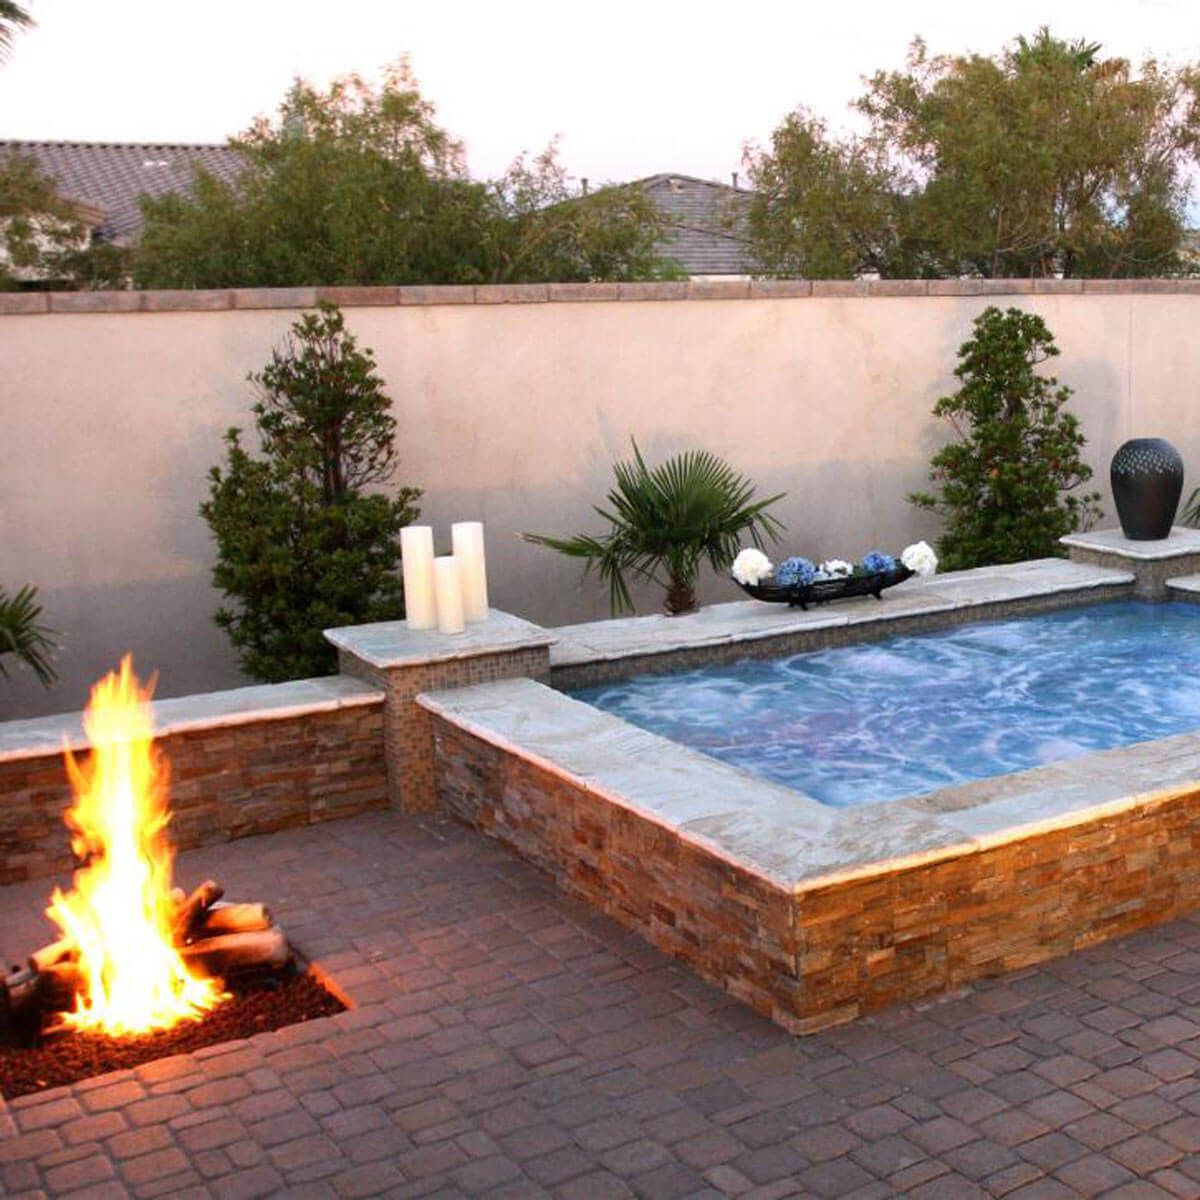 Fire Pit and Jacuzzi Combination